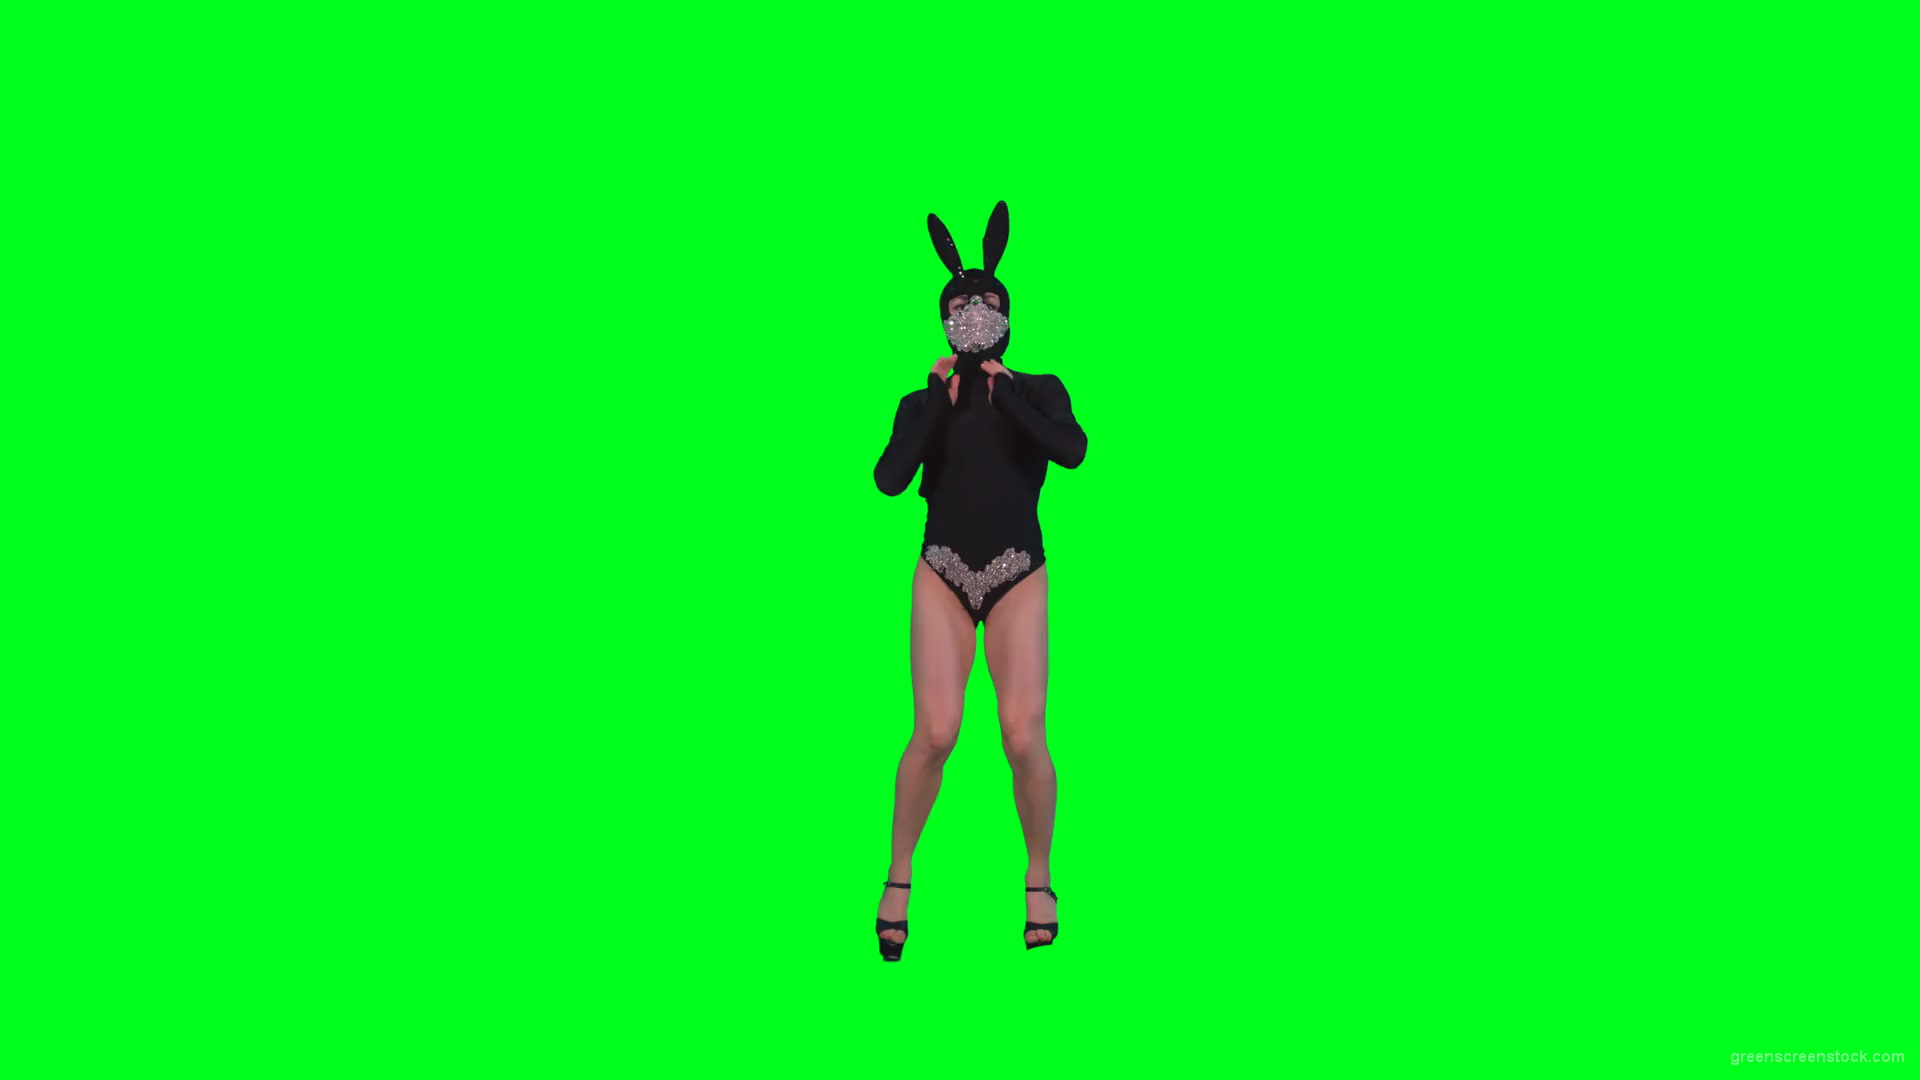 Sexy-dancing-girl-in-rabbit-mask-and-black-fashion-dress-posing-in-fetish-style-isolated-on-green-screen-4K-Video-Footage-1920_001 Green Screen Stock